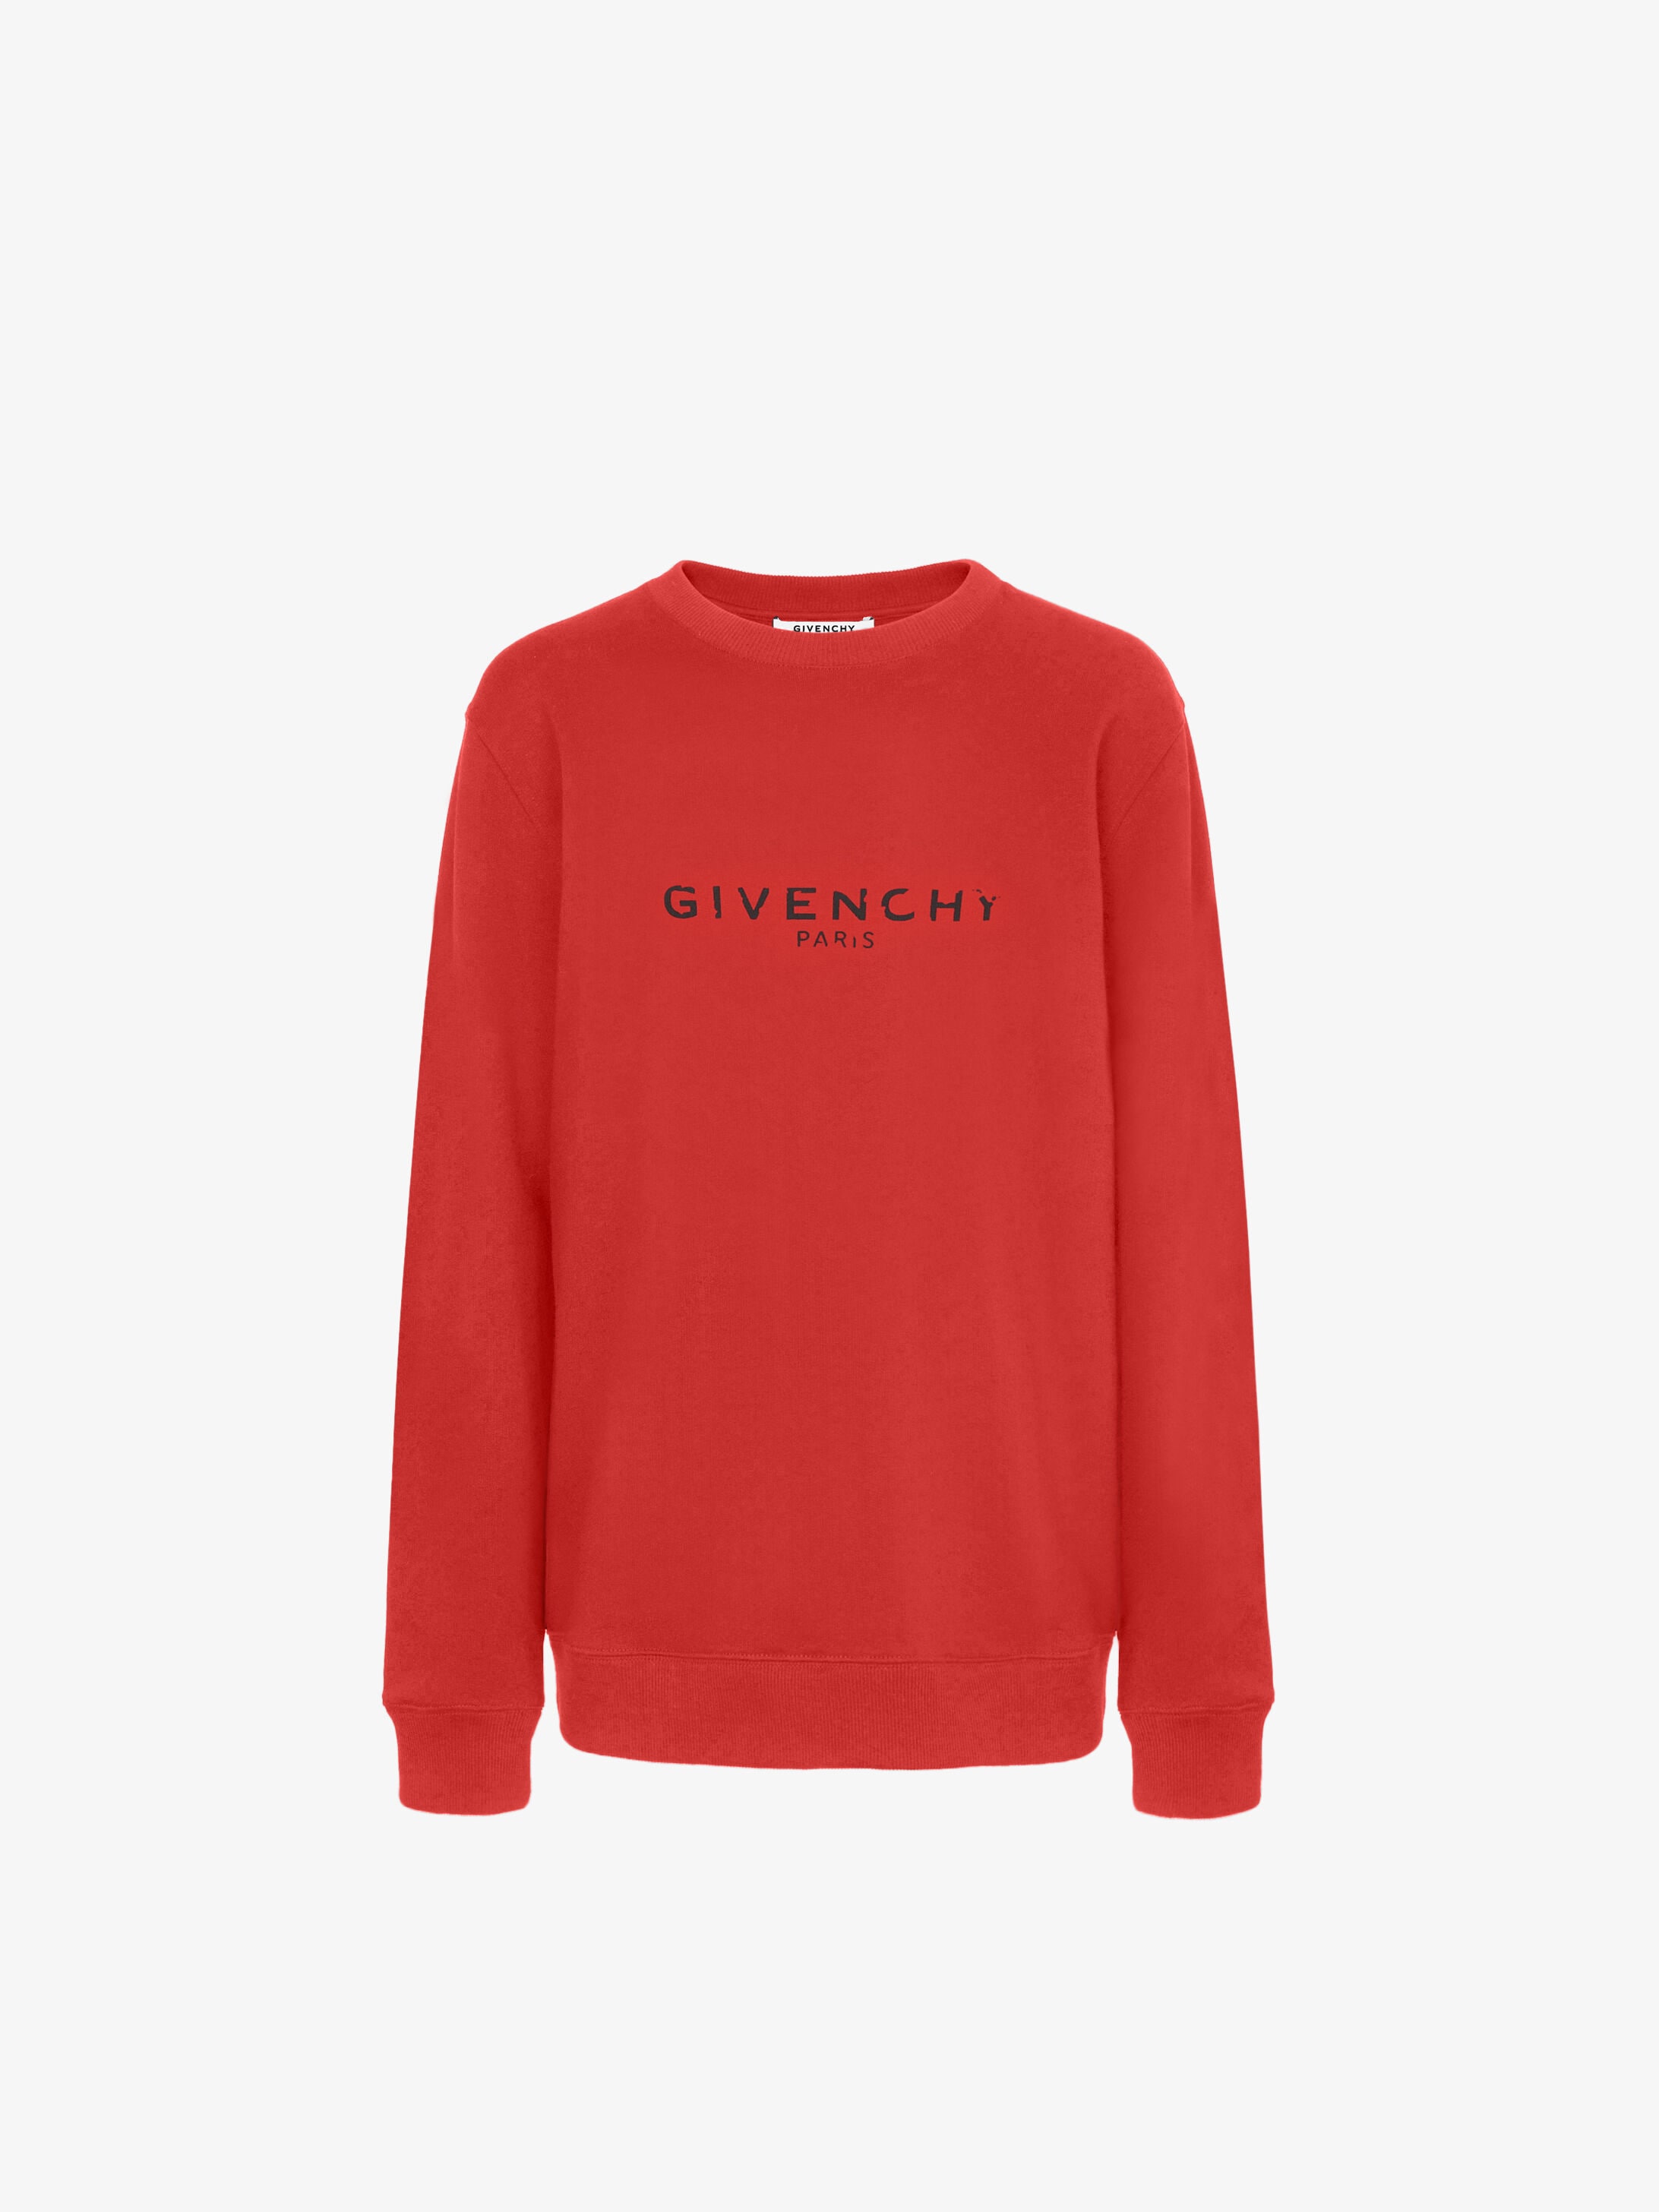 givenchy red t shirt